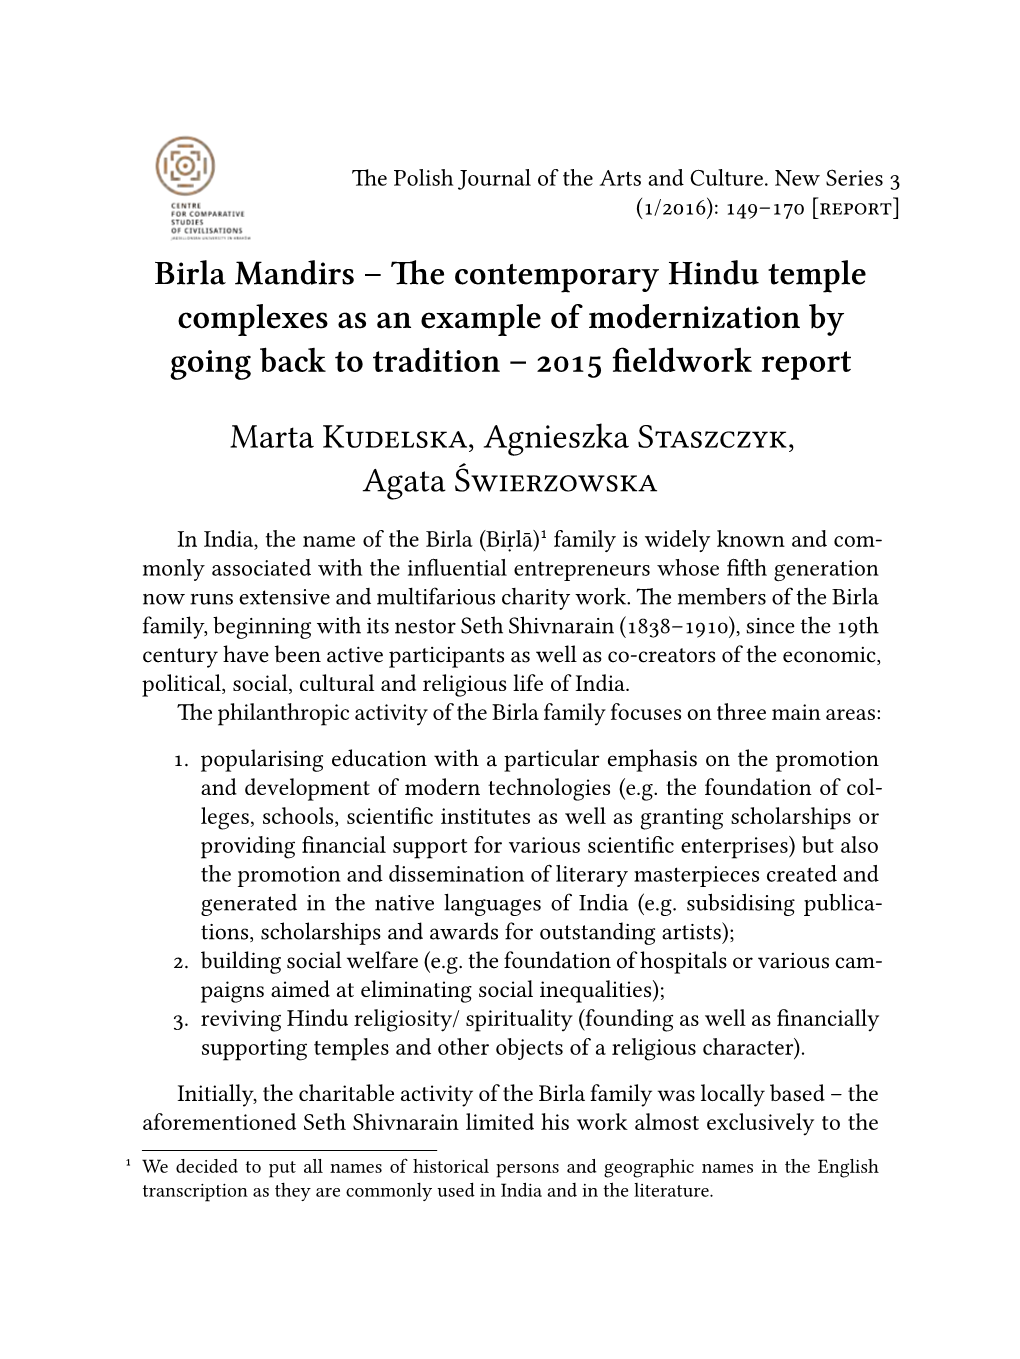 Birla Mandirs – the Contemporary Hindu Temple Complexes As an Example of Modernization by Going Back to Tradition – 2015 Fieldwork Report